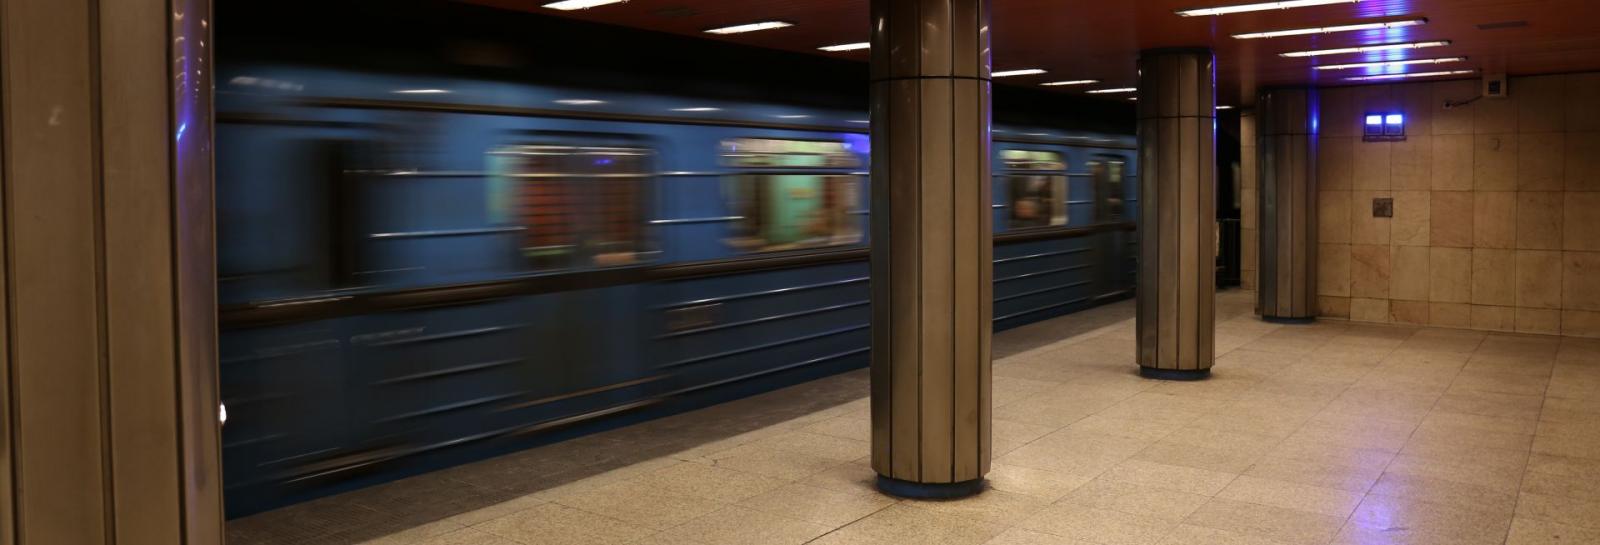 Last Phase Of Metro 3 Upgrade In Budapest Starts In March